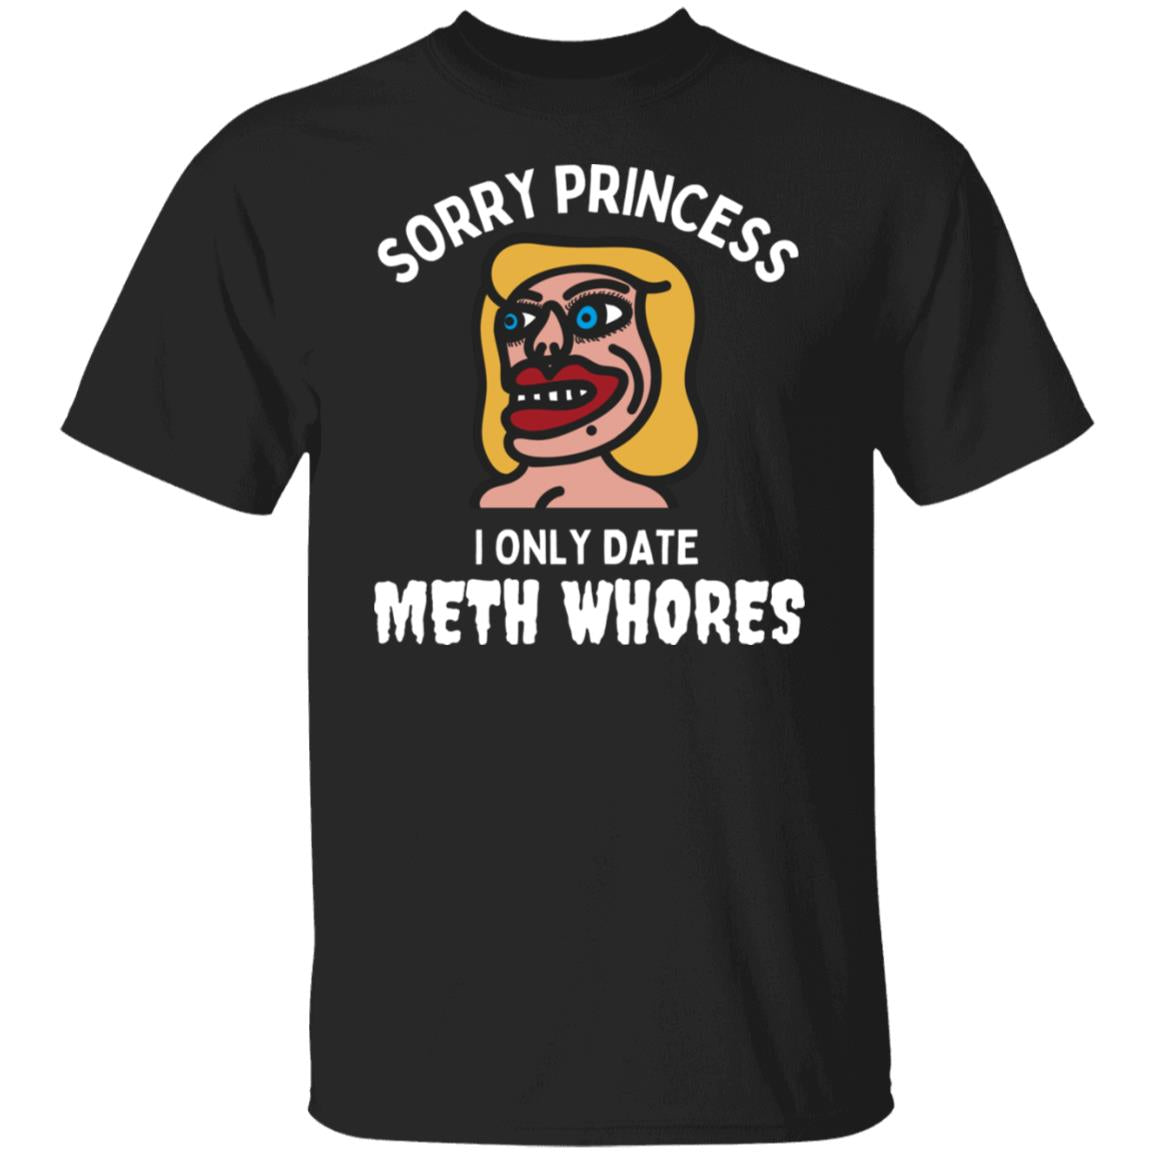 Sorry Princess, I Only Date Meth Whores Sarcastic Adult Humor Graphic Tee  T-Shirt